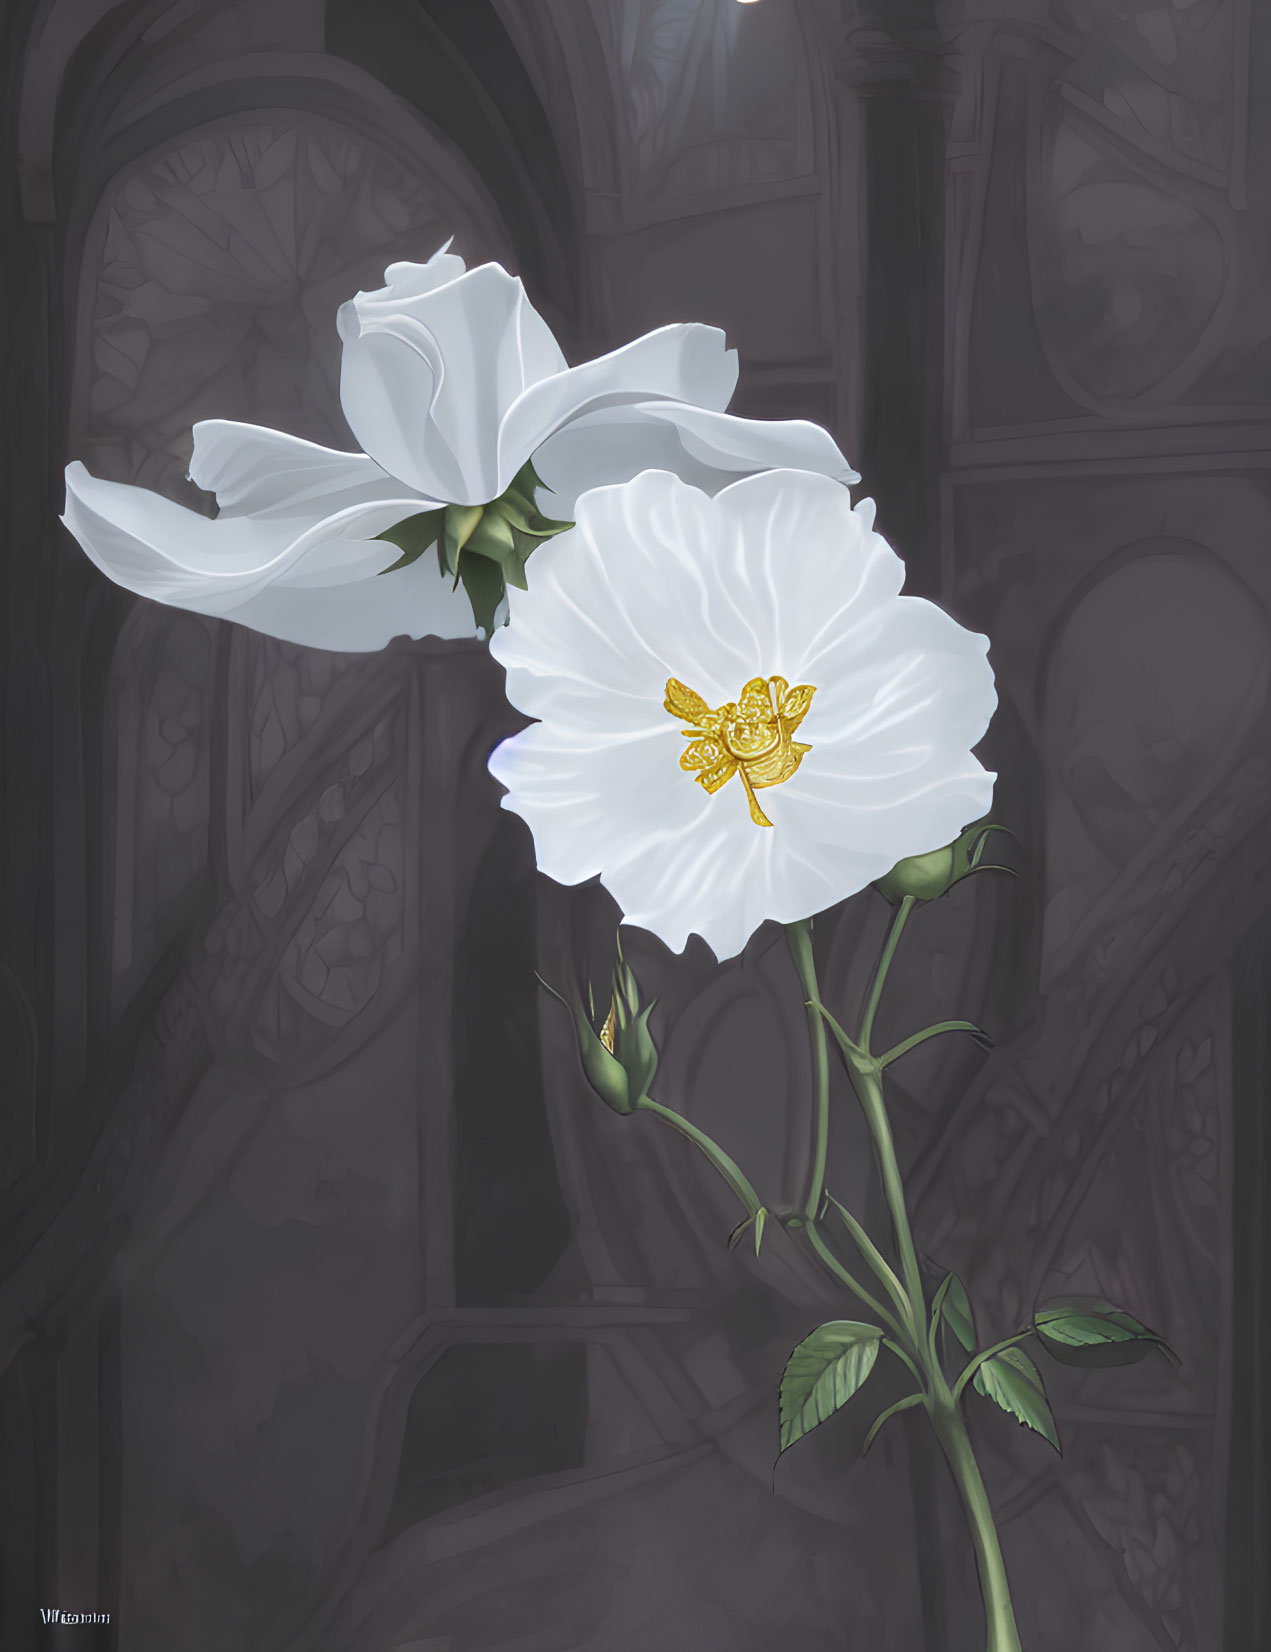 Two White Flowers with Golden Centers in Gothic Setting